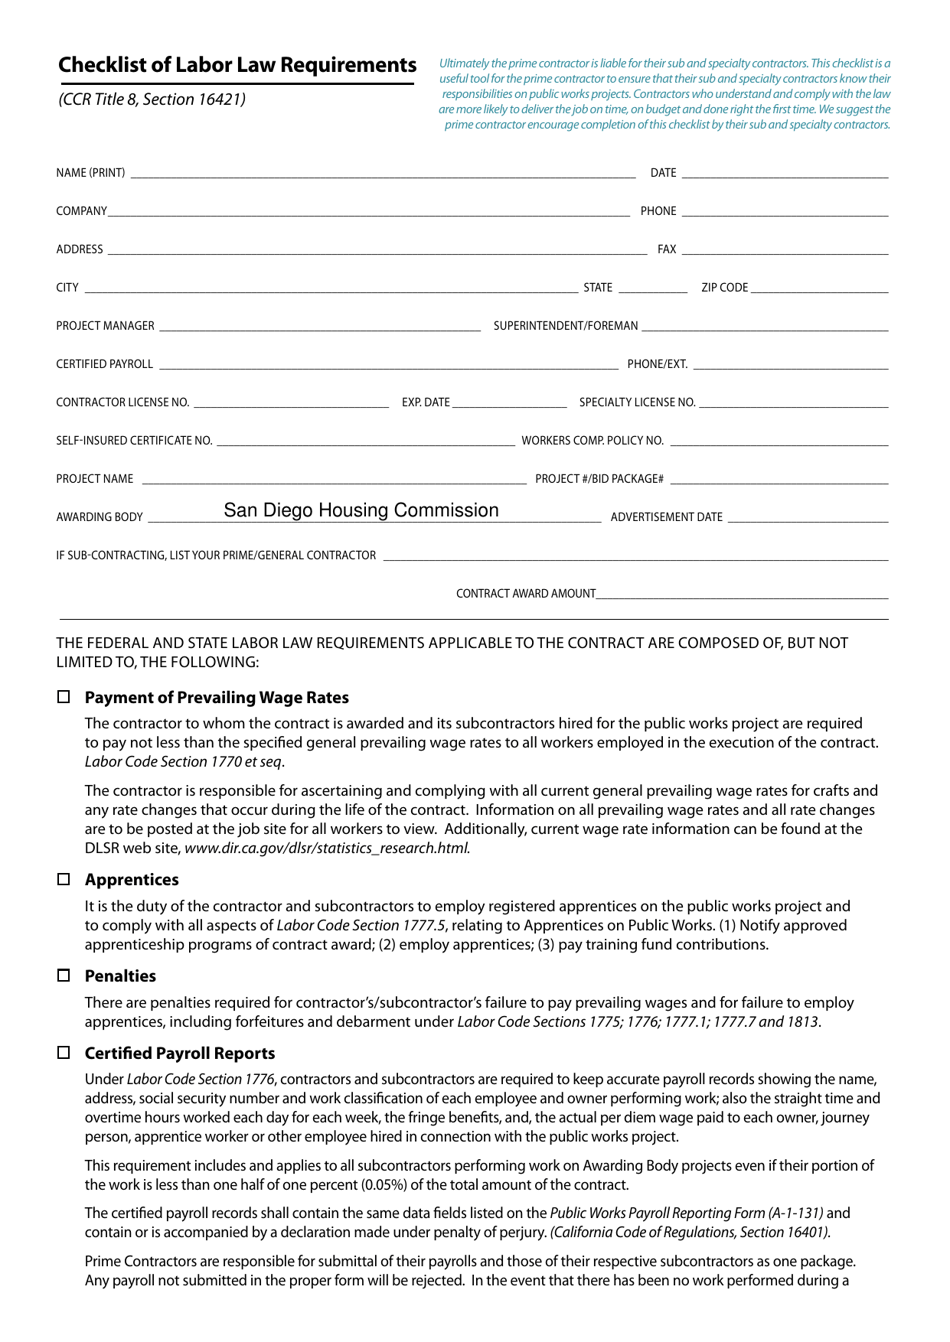 Checklist of Labor Law Requirements - City of San Diego, California, Page 1